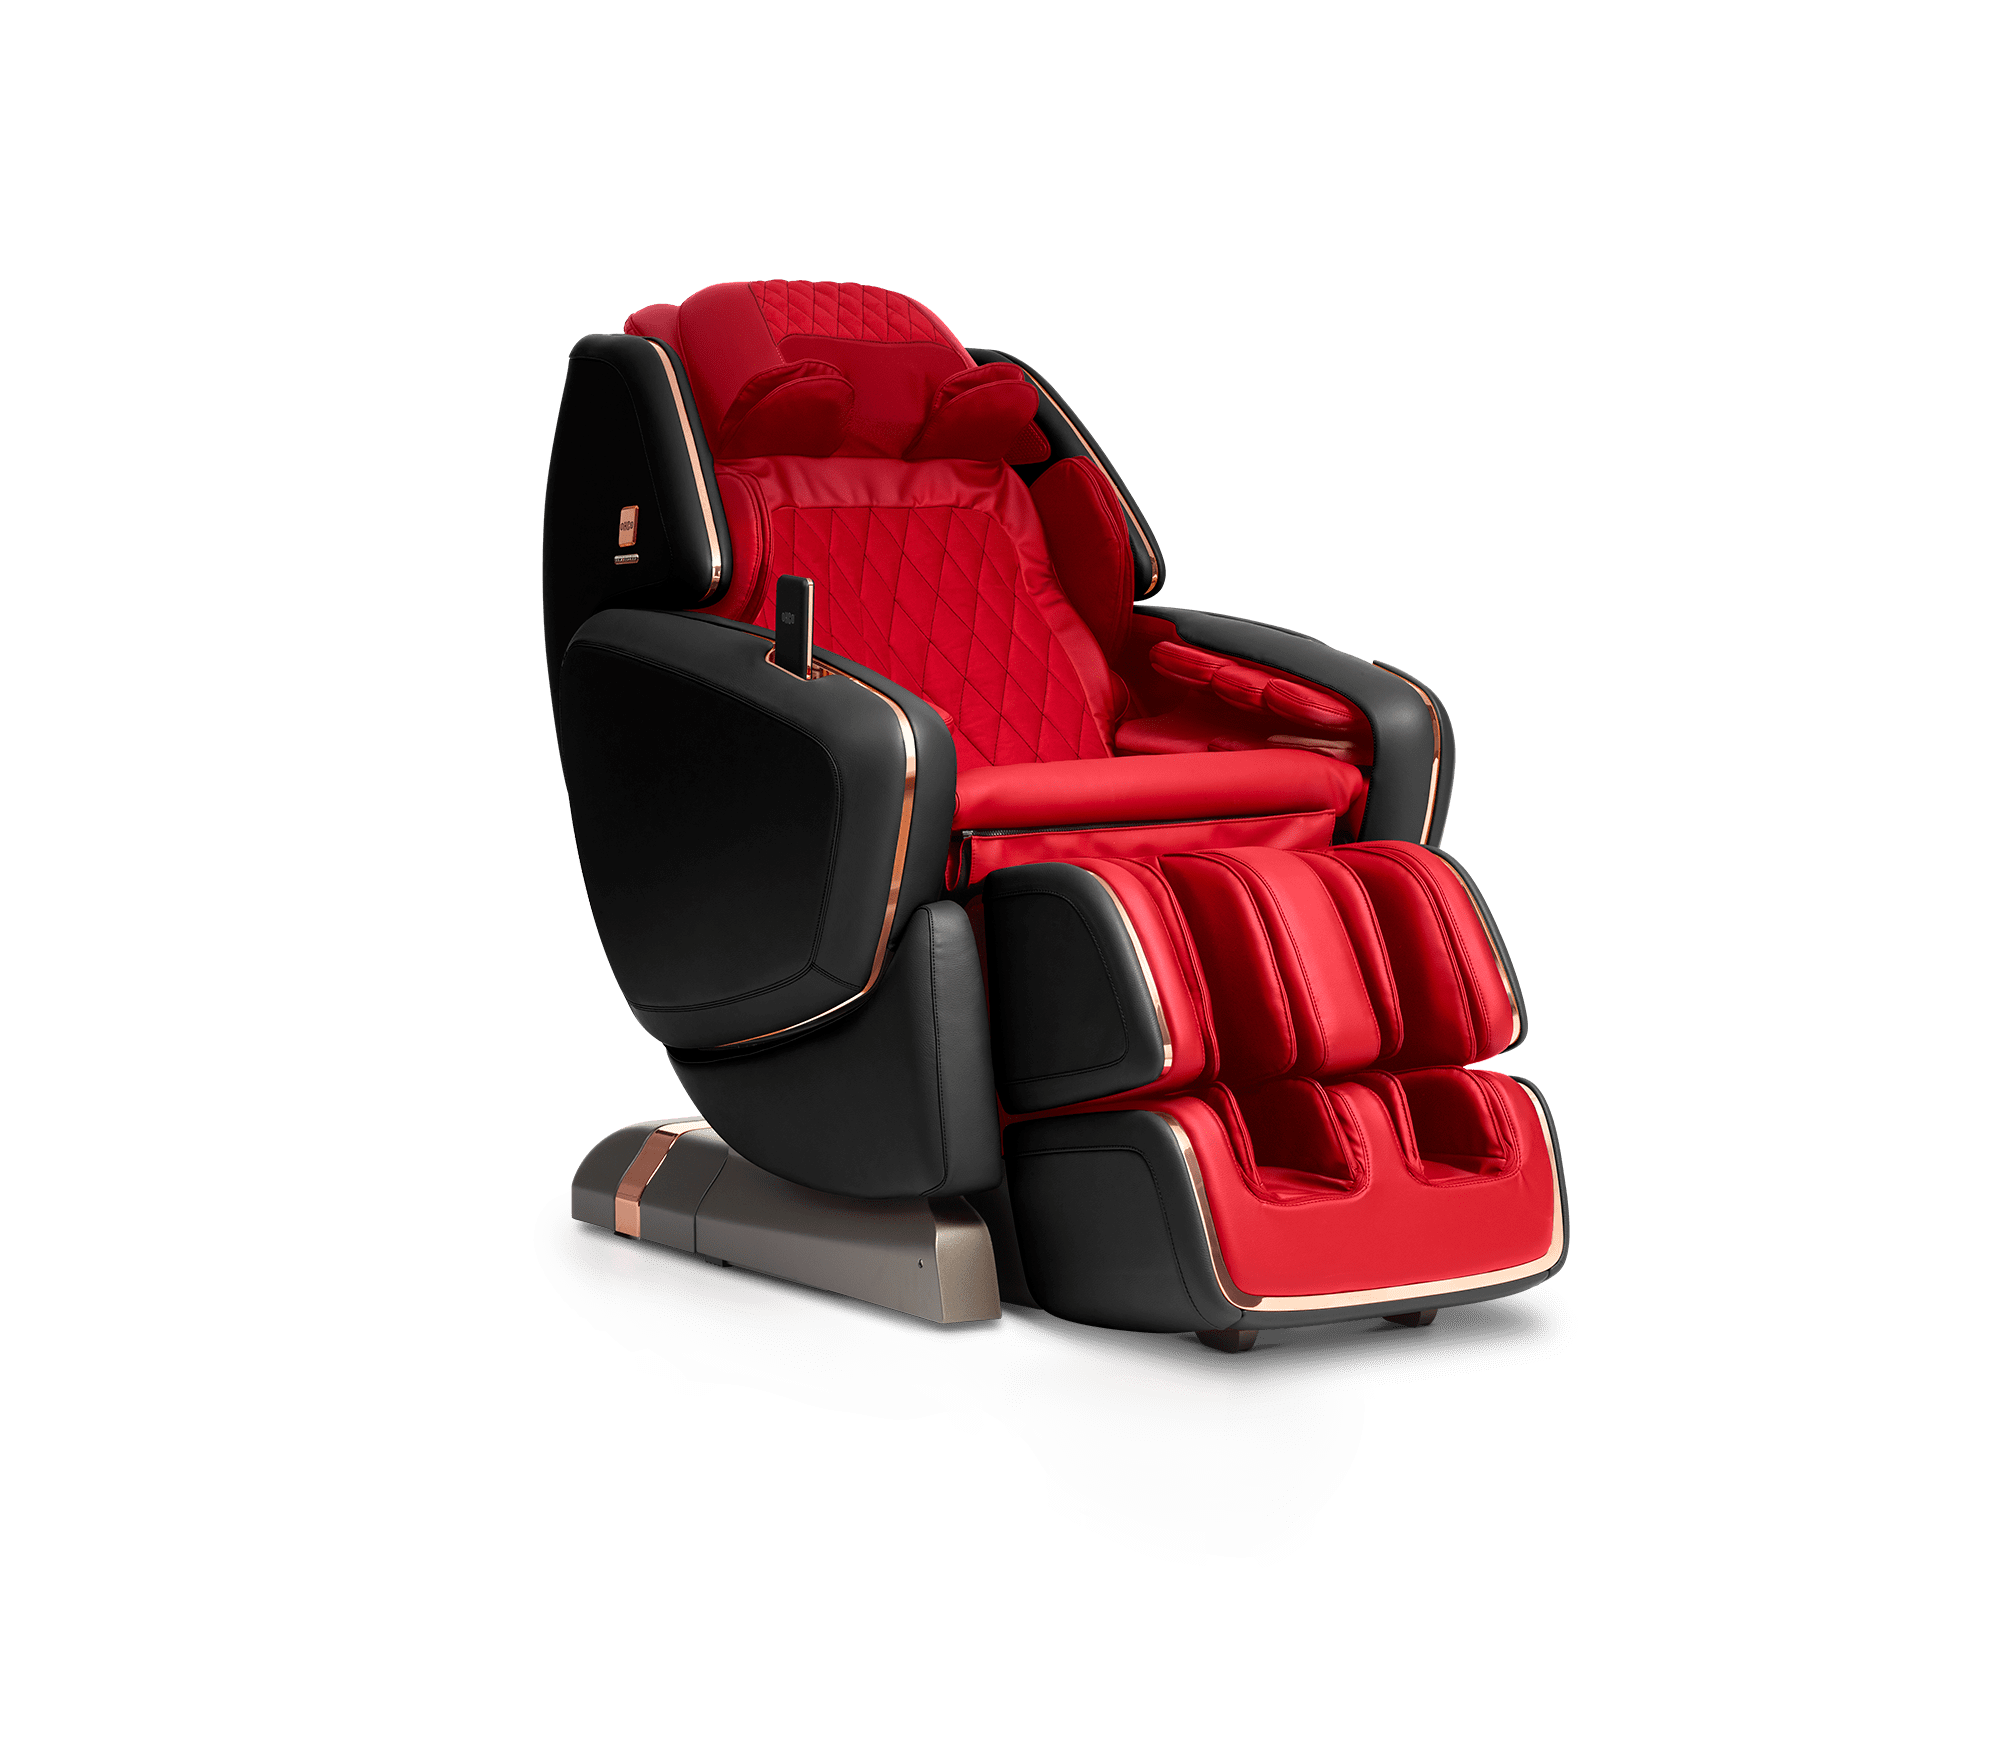 Dreamwave M 8le Considered The World S Best Massage Chair